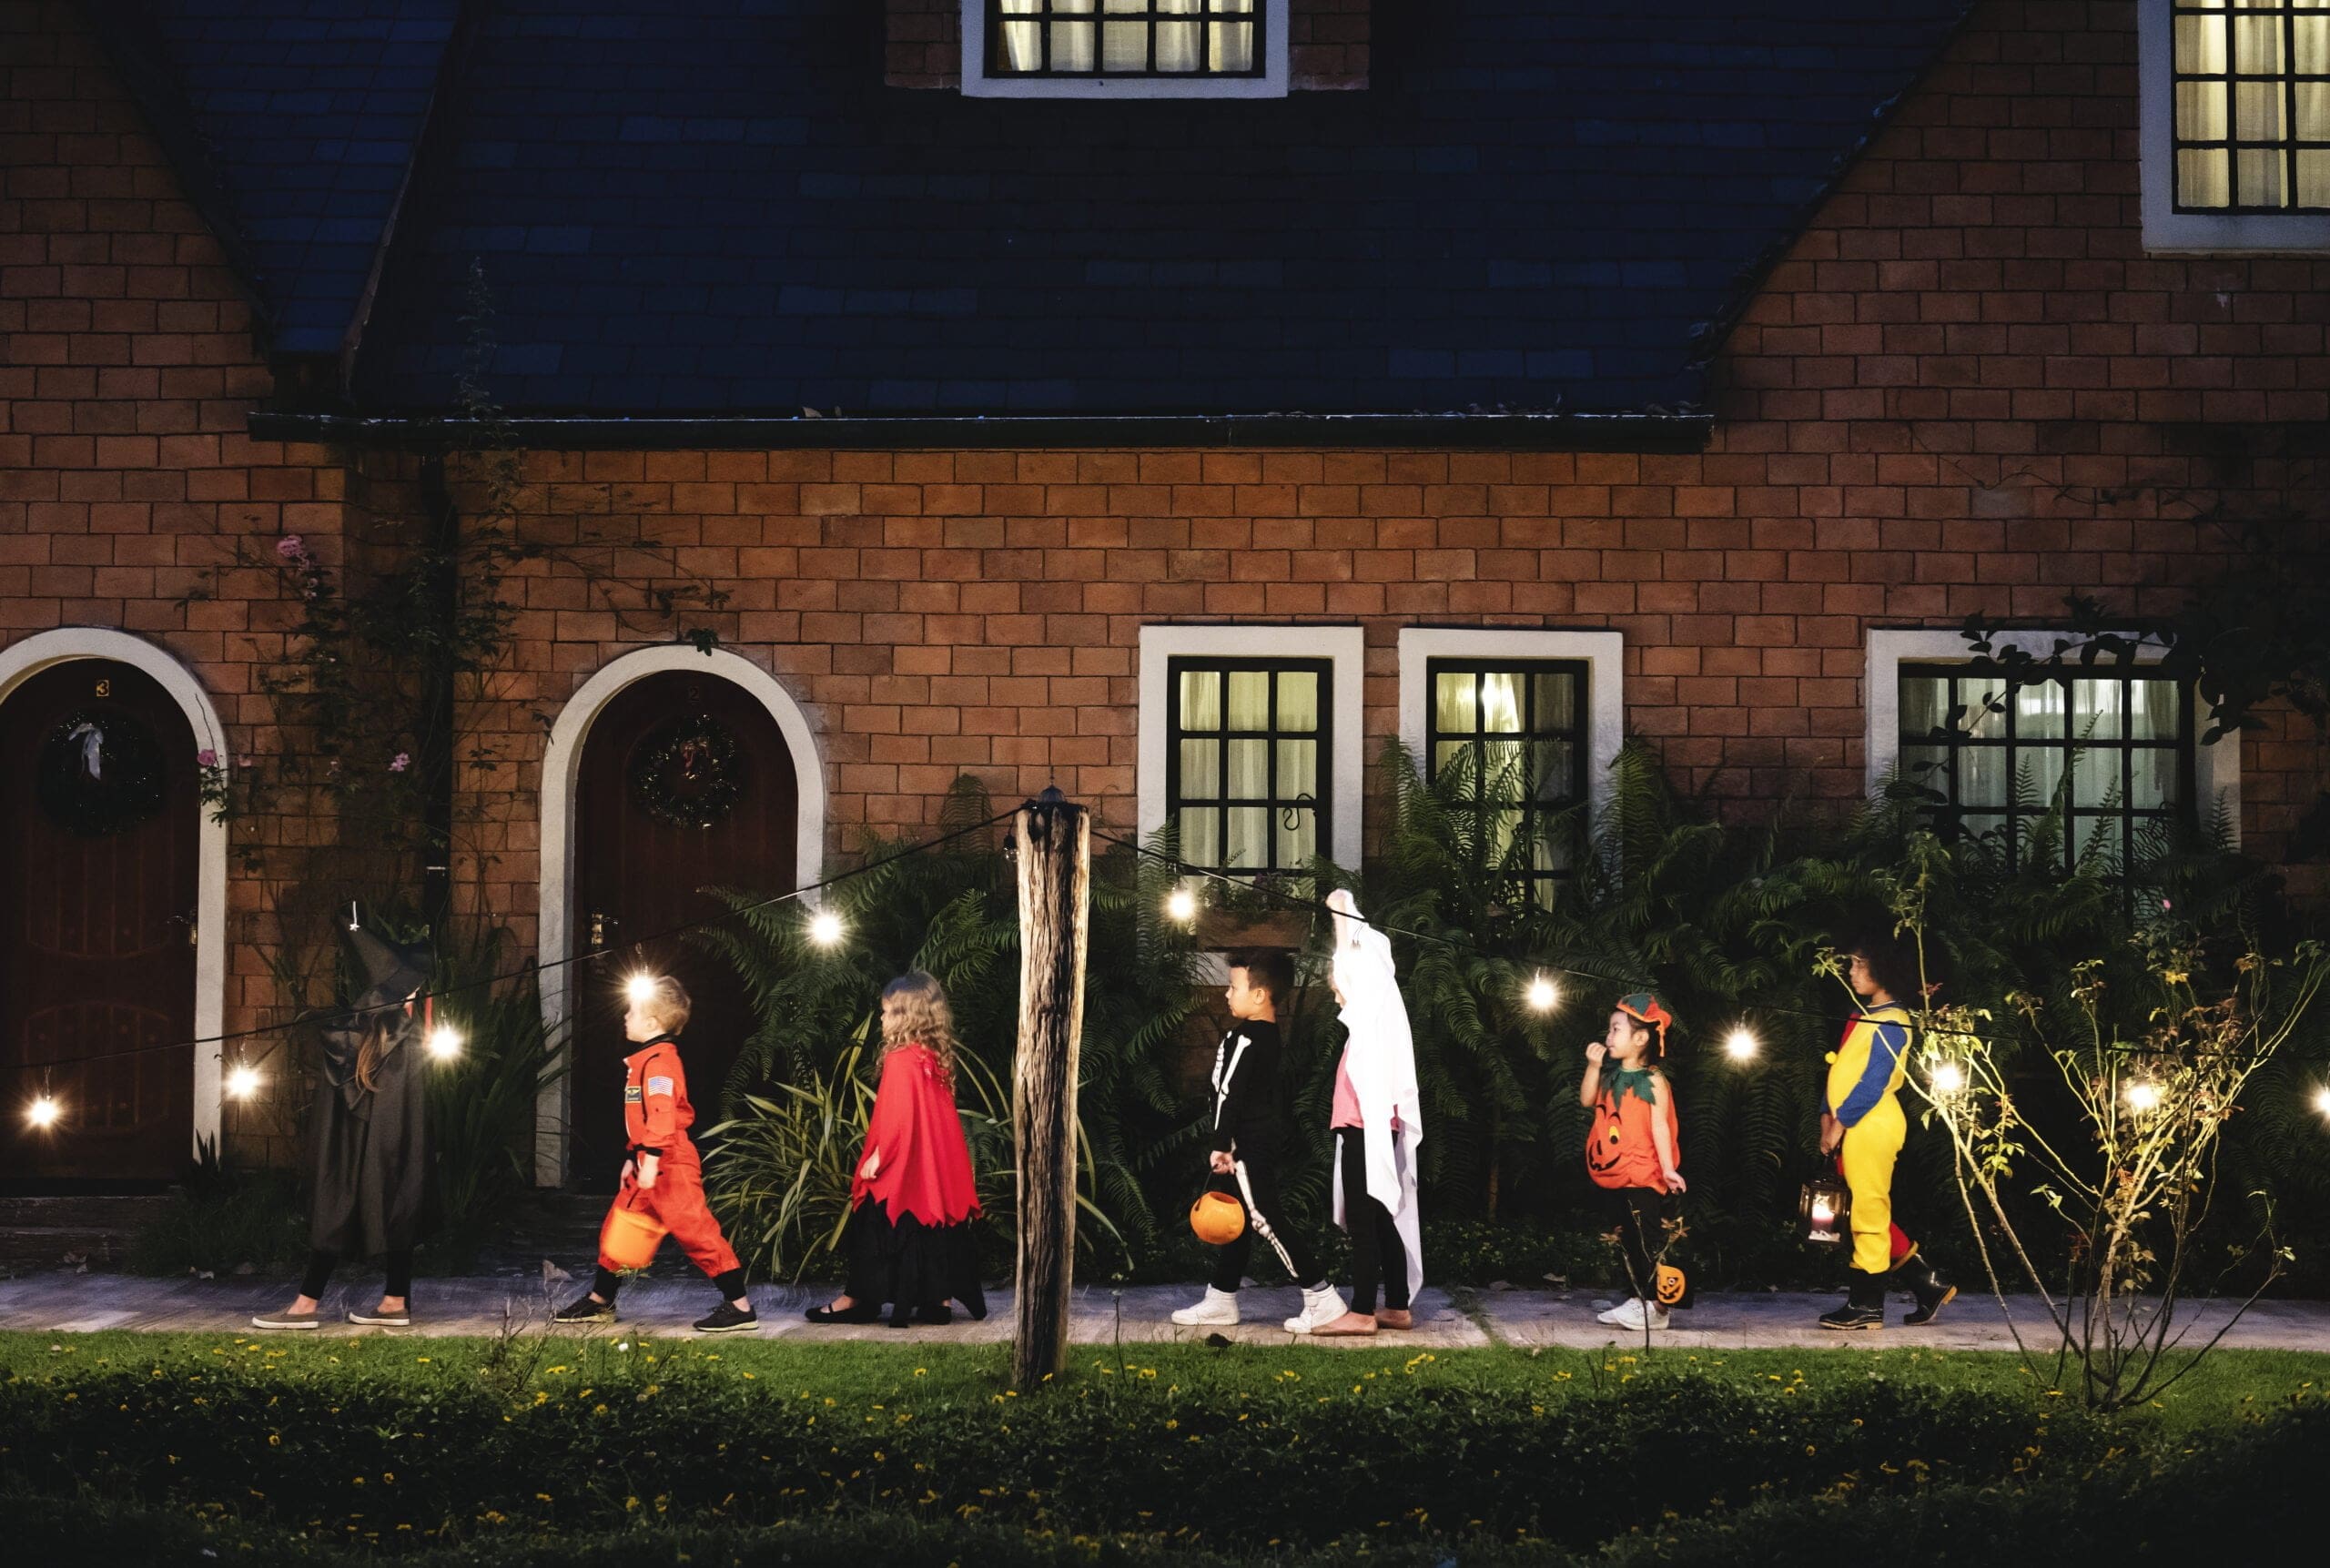 group-kids-with-DIY-halloween-costumes-walking-trick-treating